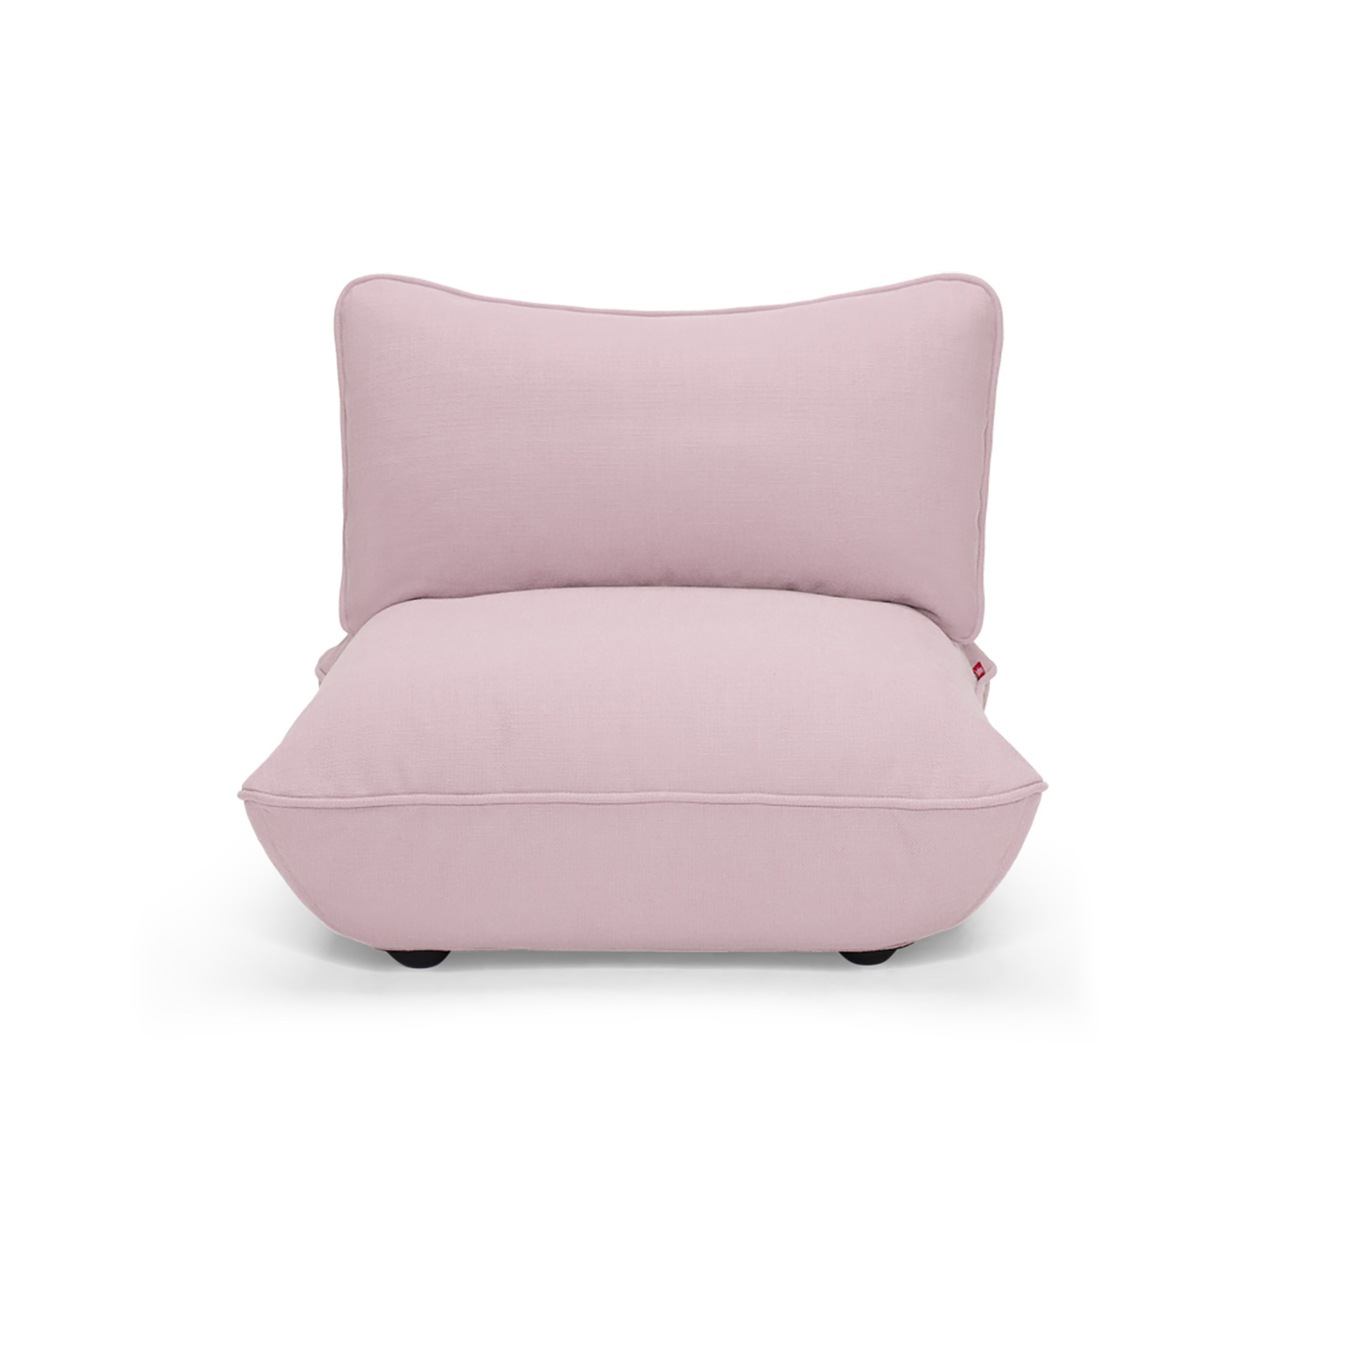 Sumo Stopning Sittedel, Bubble Pink